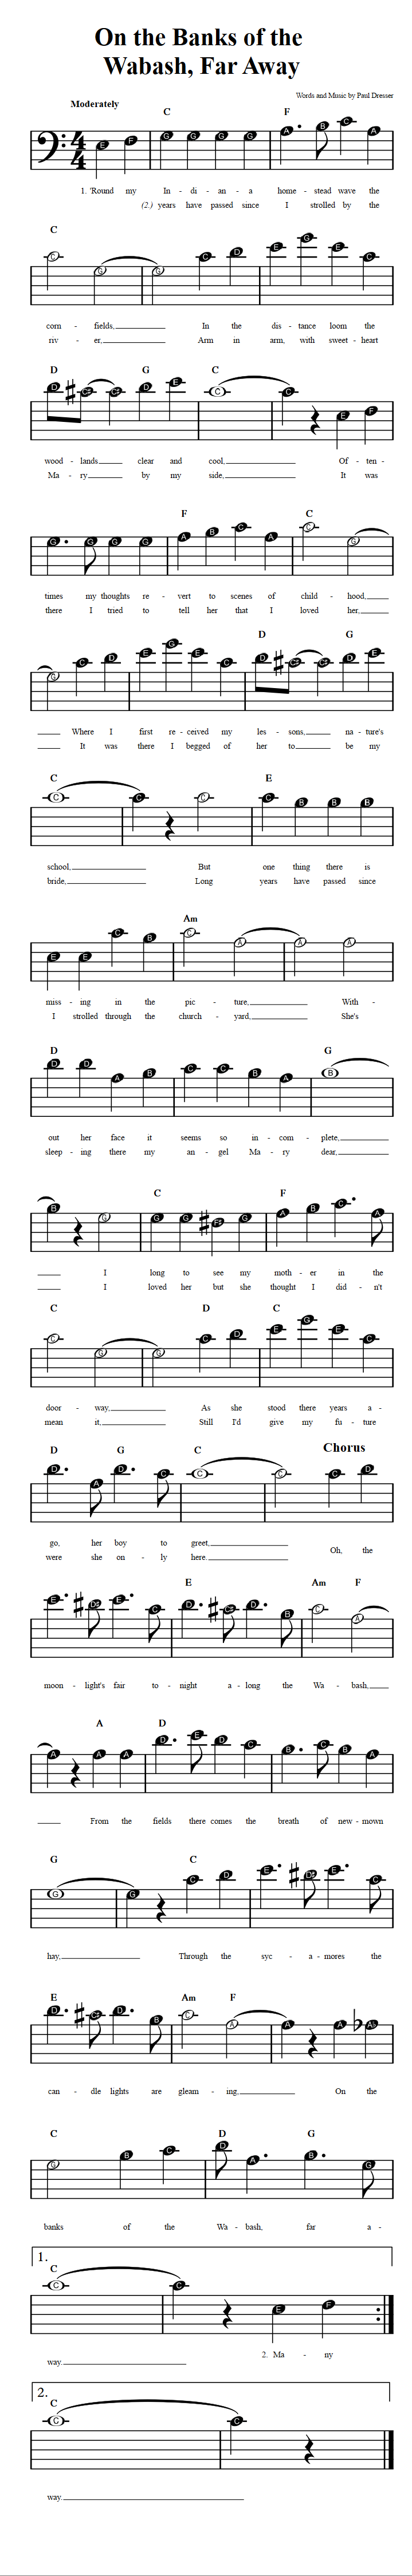 On the Banks of the Wabash, Far Away  Beginner Bass Clef Sheet Music